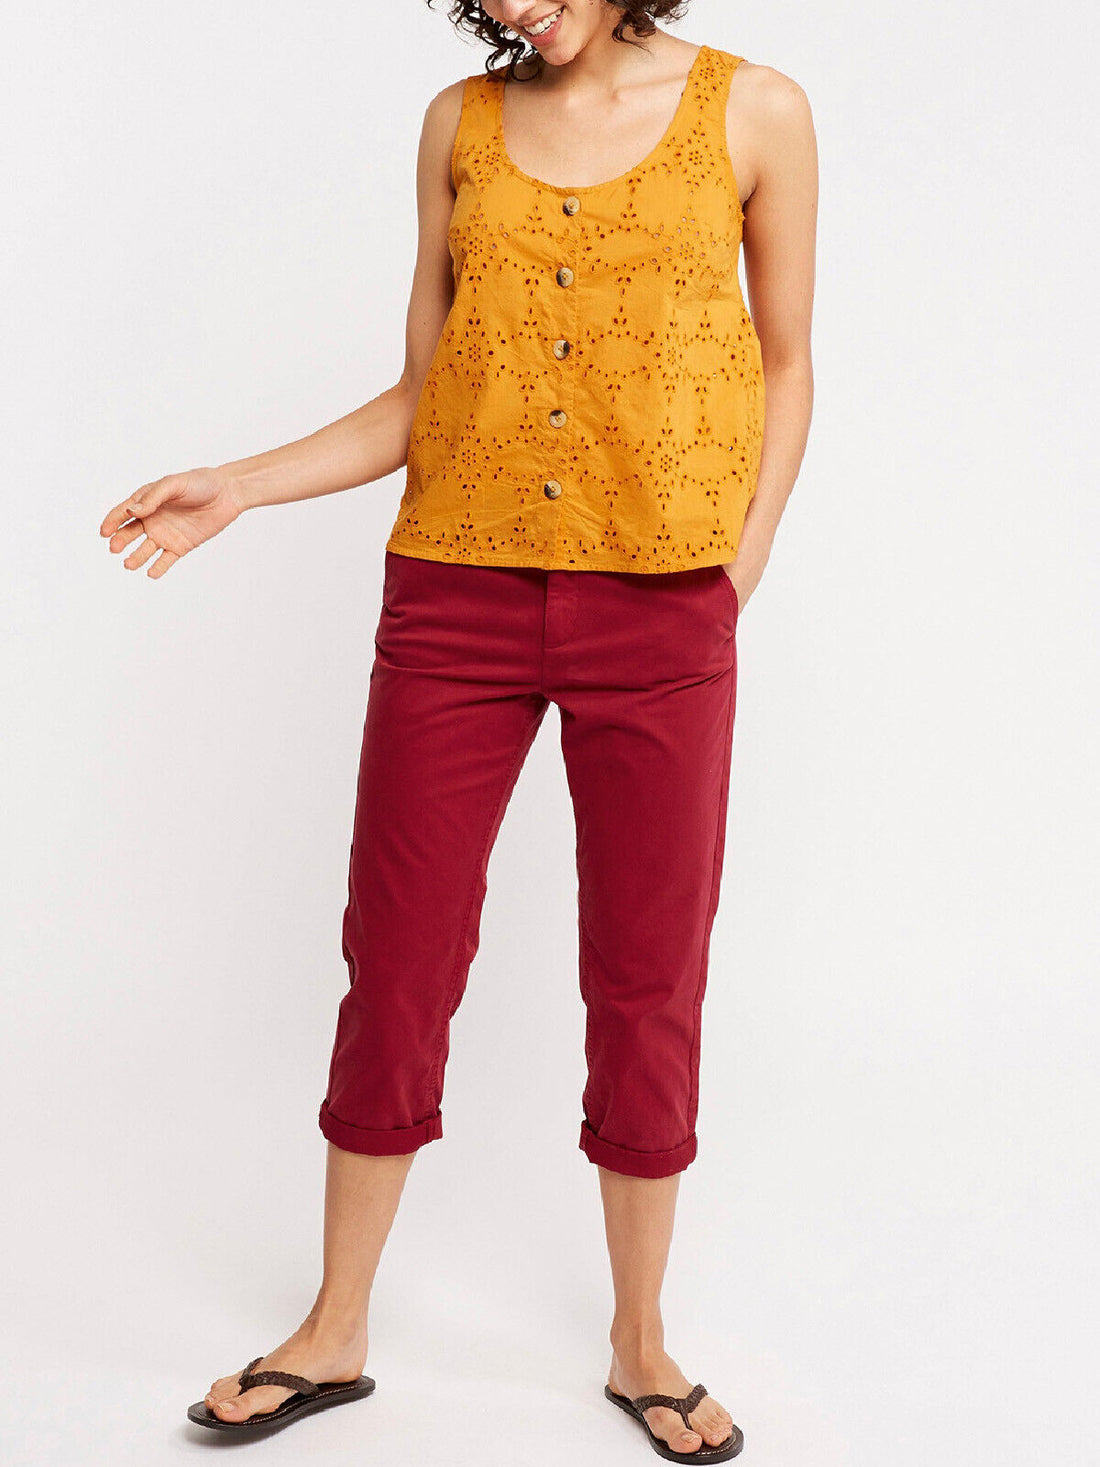 EX Fat Face Ochre Tia Broderie Button Cami in Sizes 12, 14, 16, 18 RRP £35